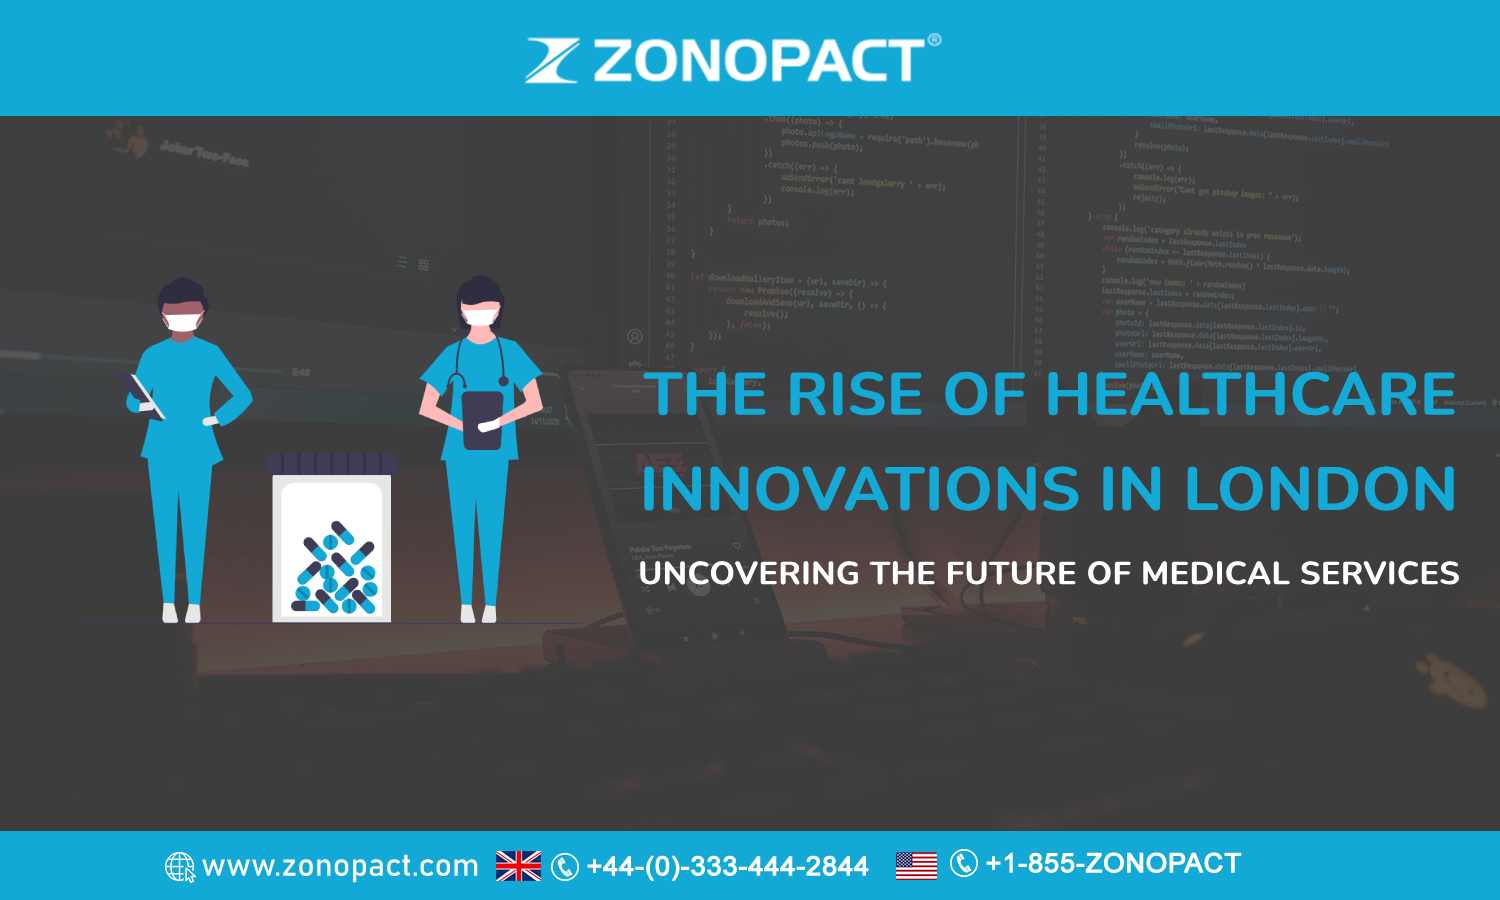 The Rise of Healthcare Innovations in London Uncovering the Future of Medical Services